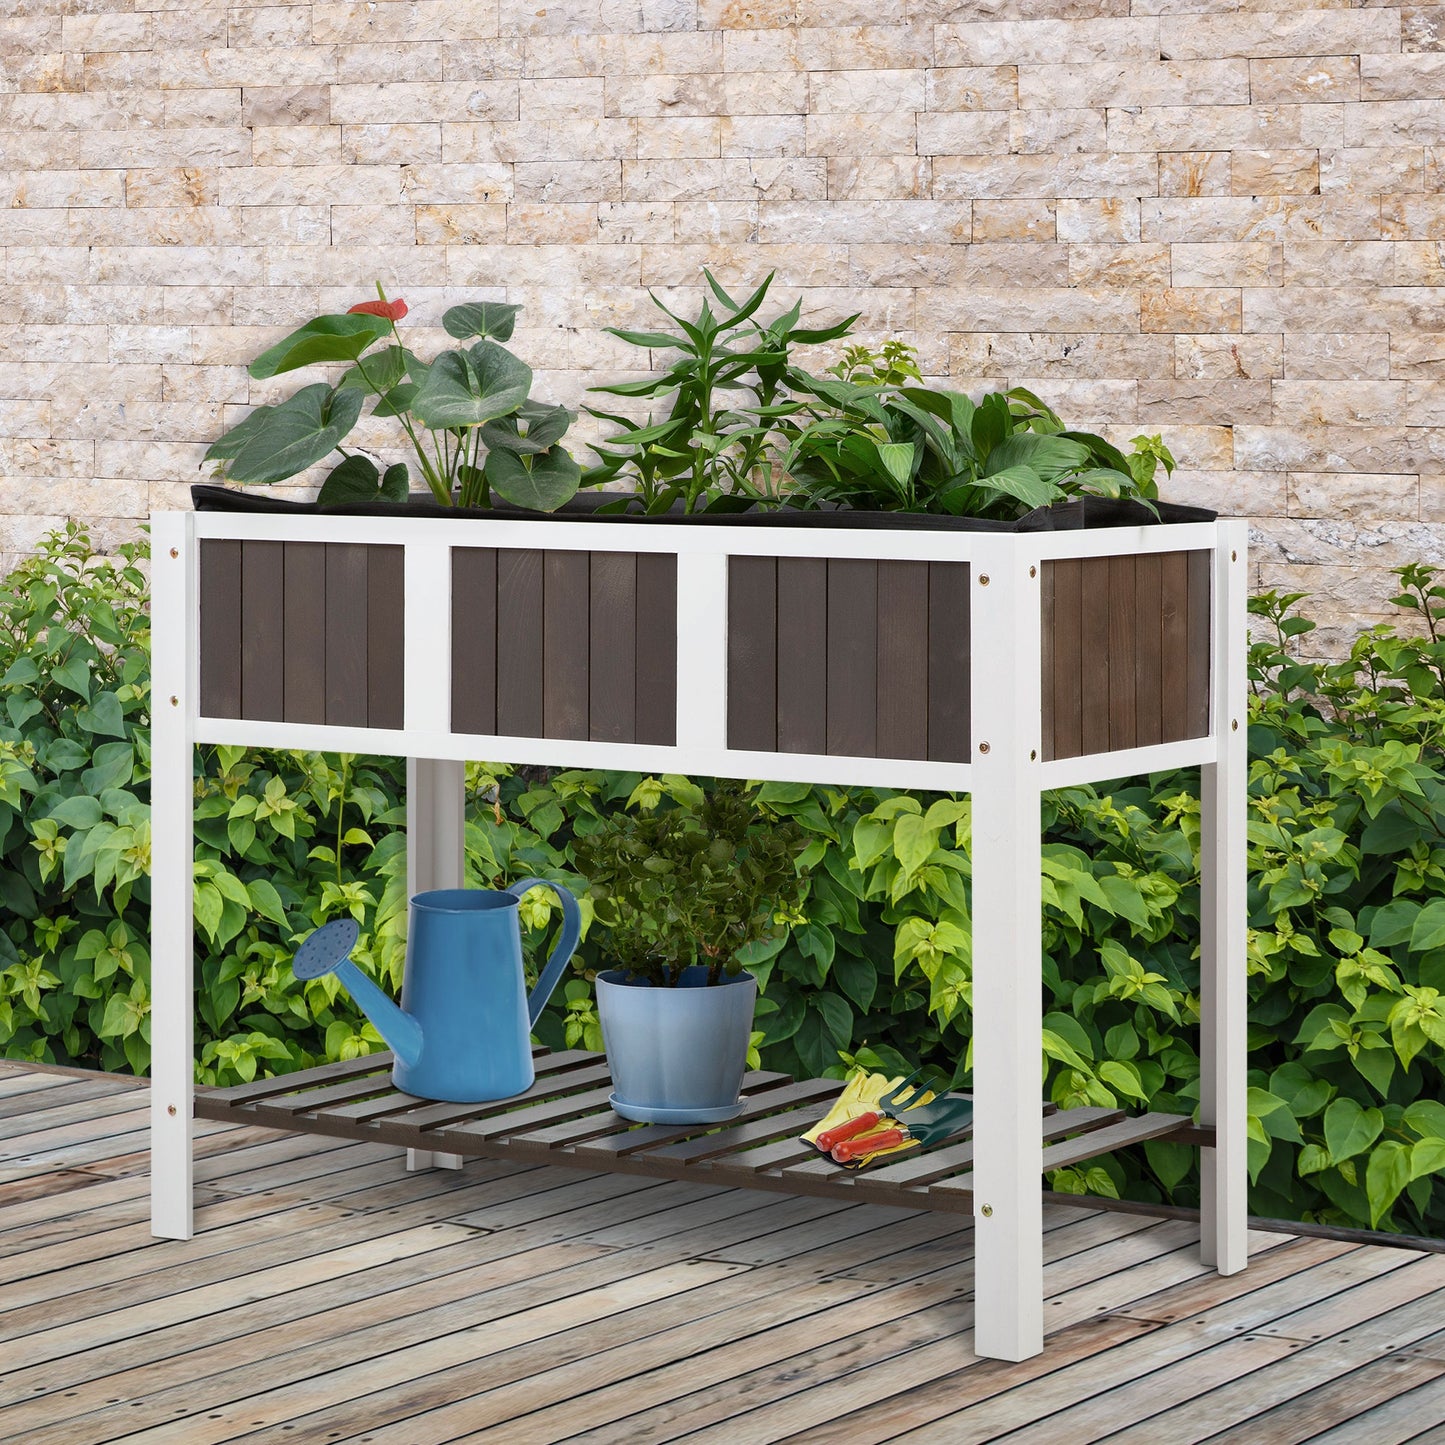 Outsunny Wooden Planter Raised Elevated Garden Bed with Shelf Solid Wood Outdoor/Indoor